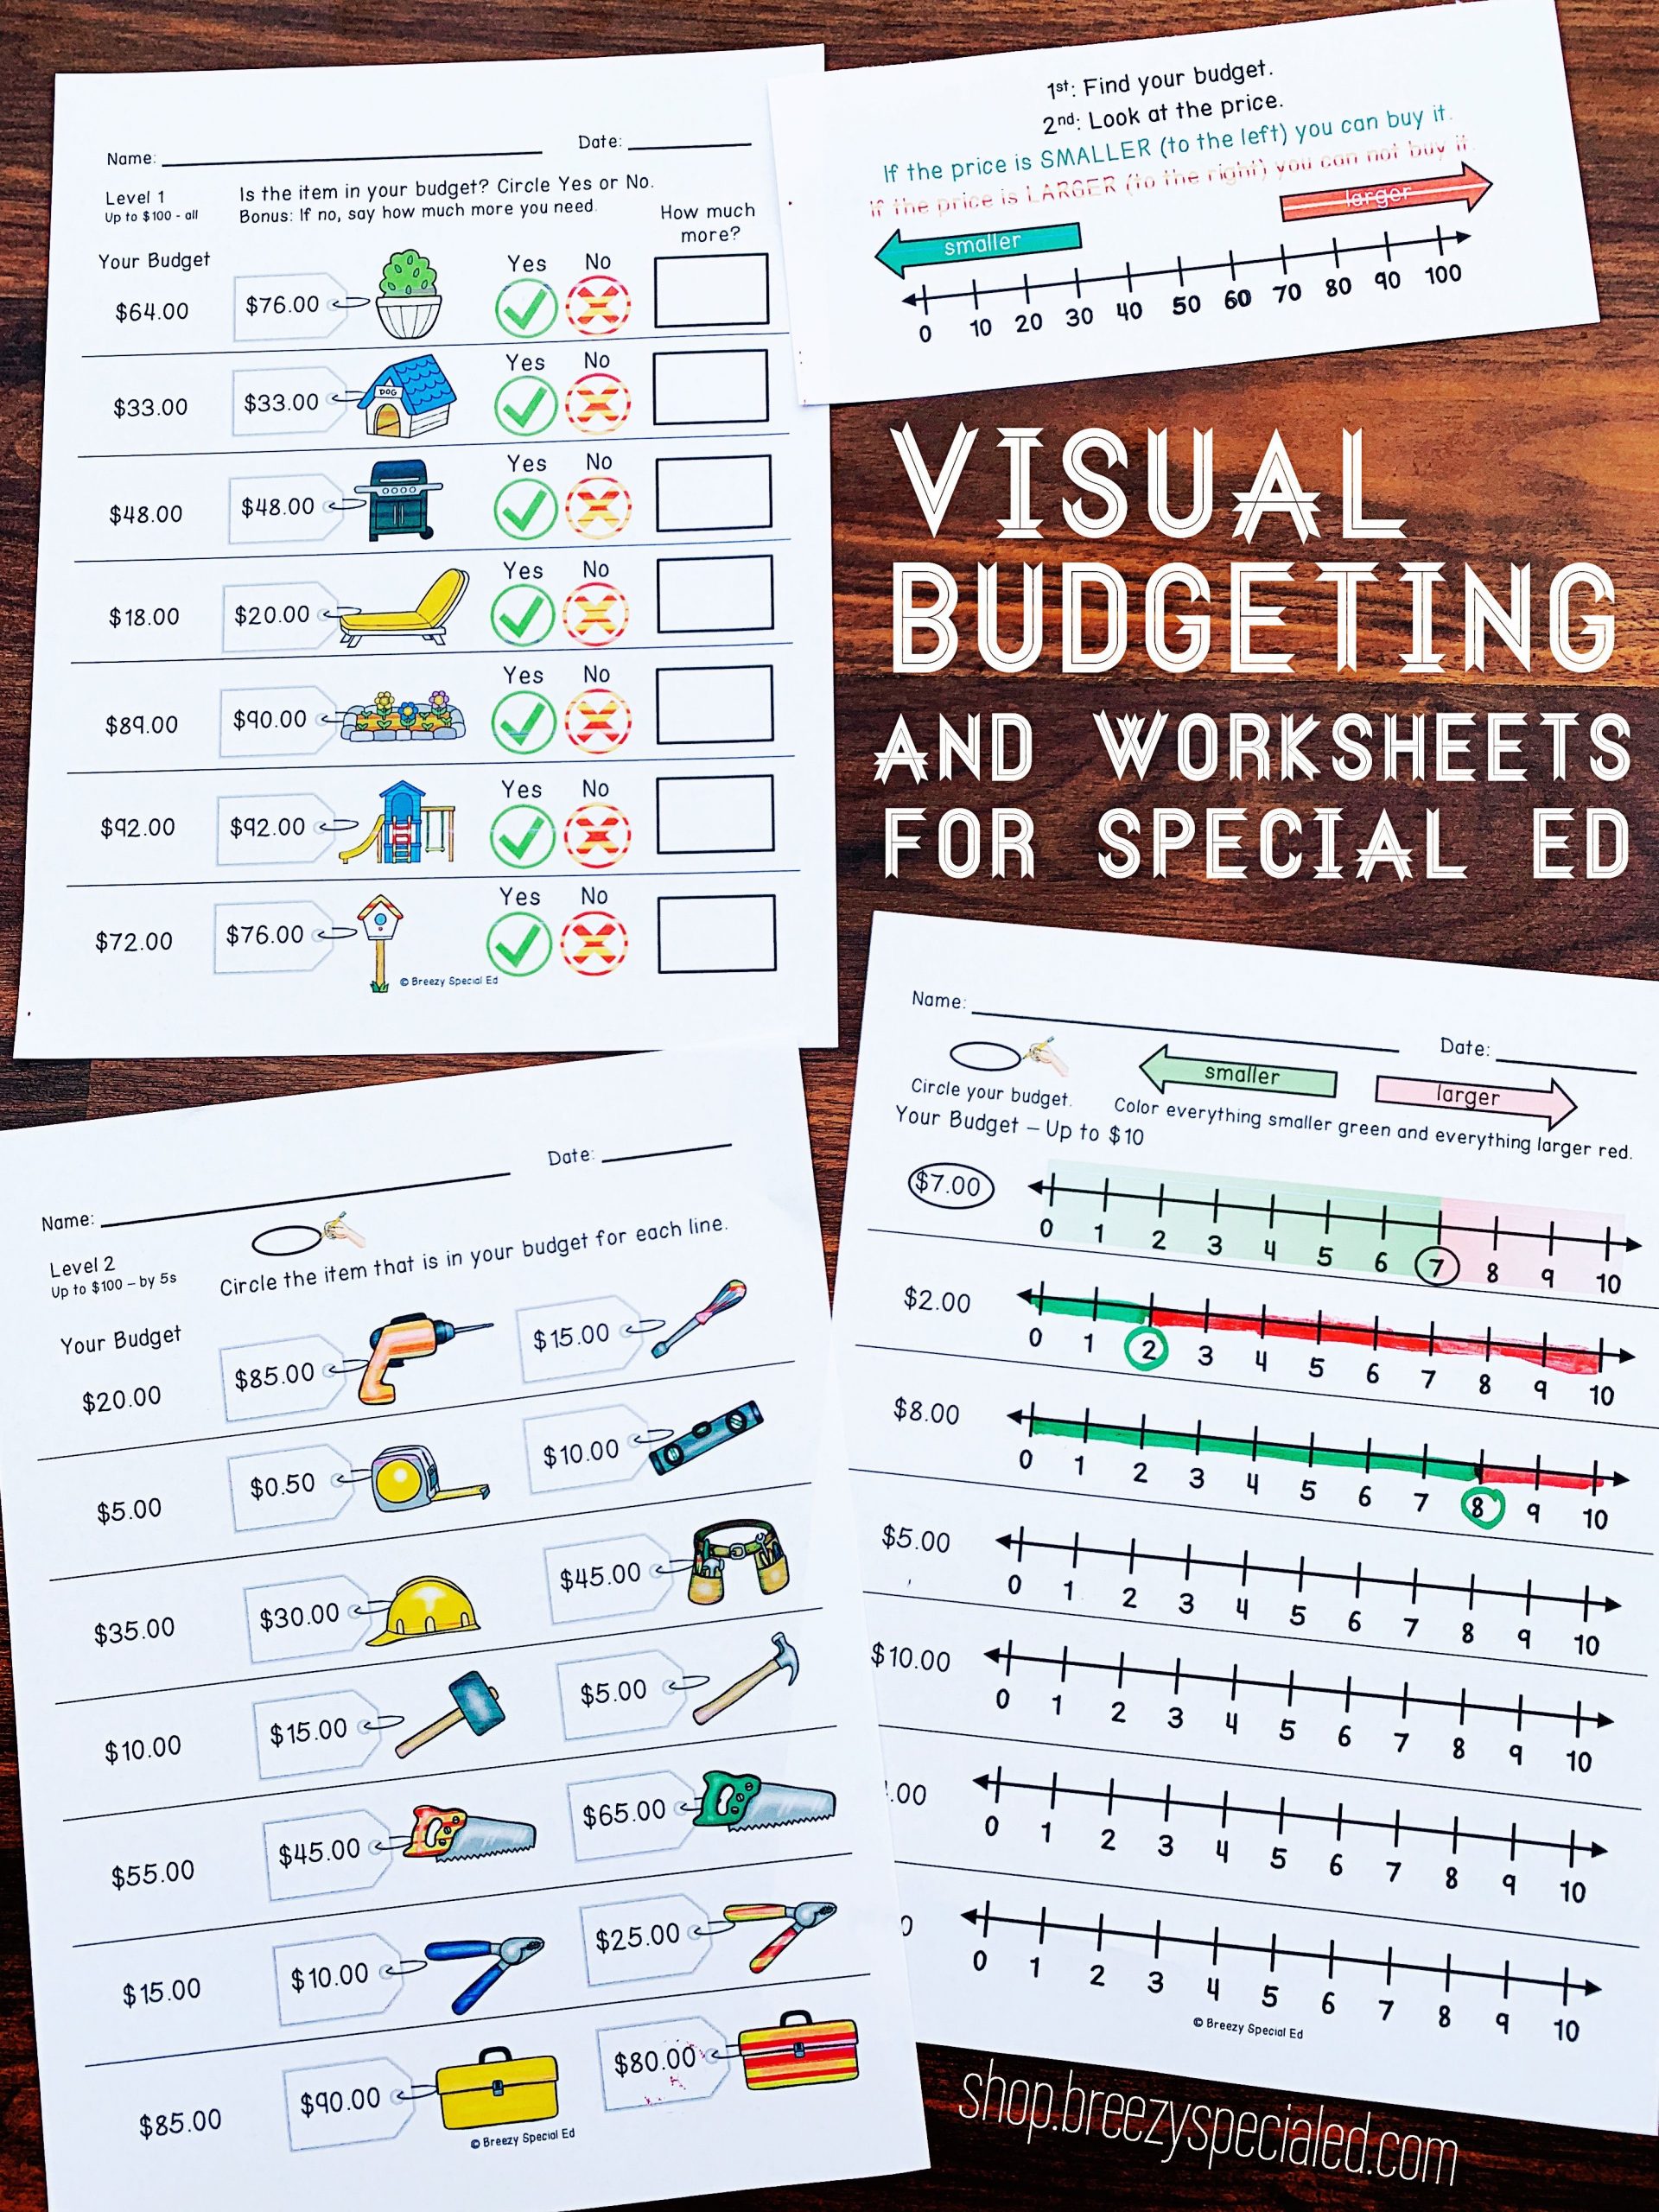 Budget Worksheets - Do You Have Enough Money? Life Skill